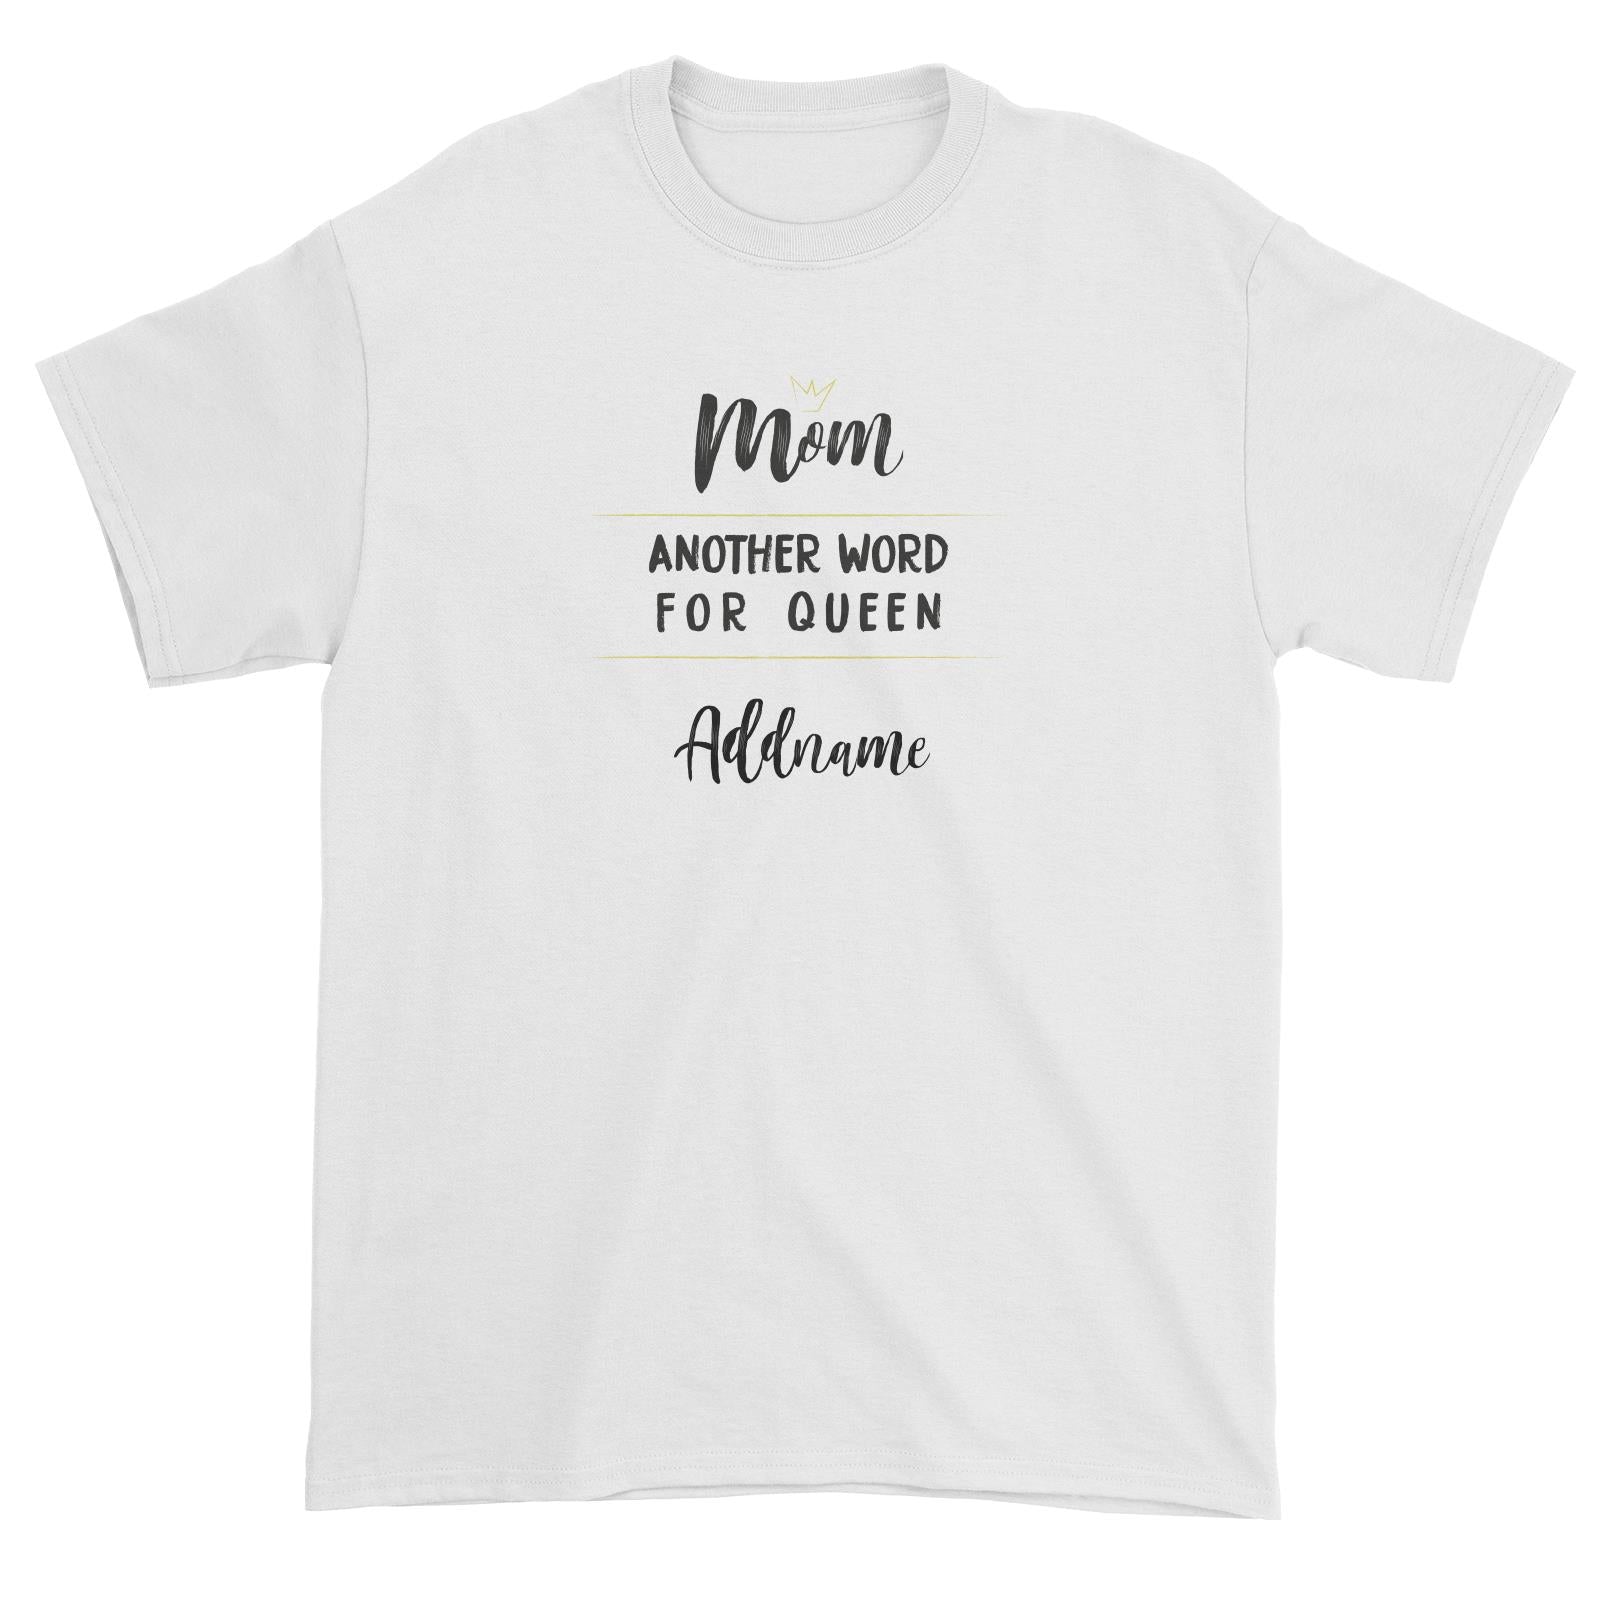 Another Word Family Mom Another Word For Queen Addname Unisex T-Shirt